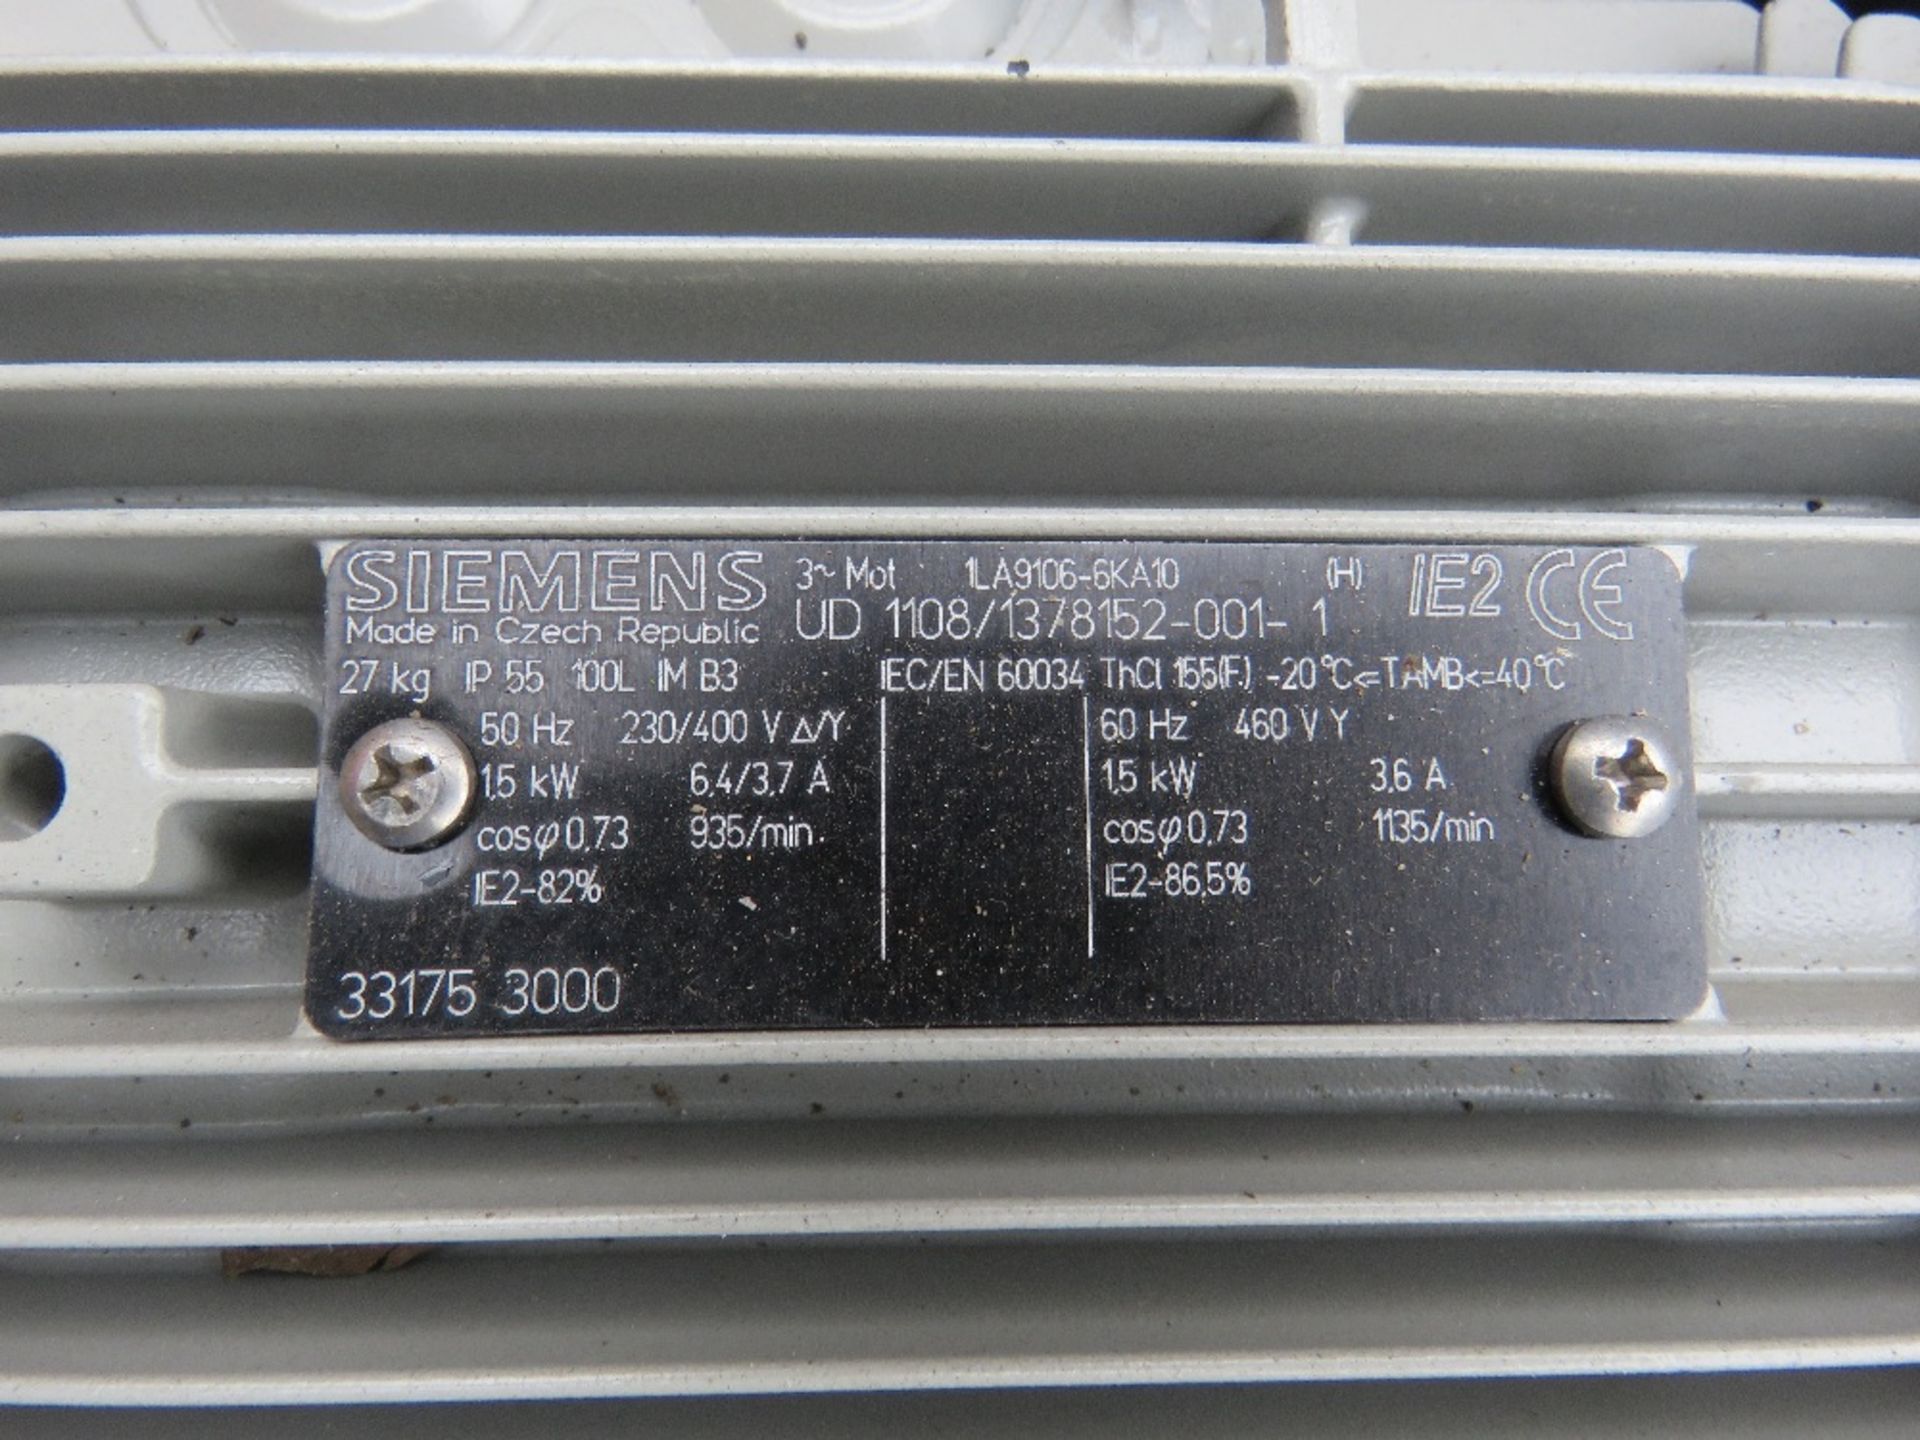 1 X SIEMENS INDUSTRIAL 1.5KW RATED ELECTRIC MOTOR, SOURCED FROM DEPOT CLEARANCE. - Image 2 of 2